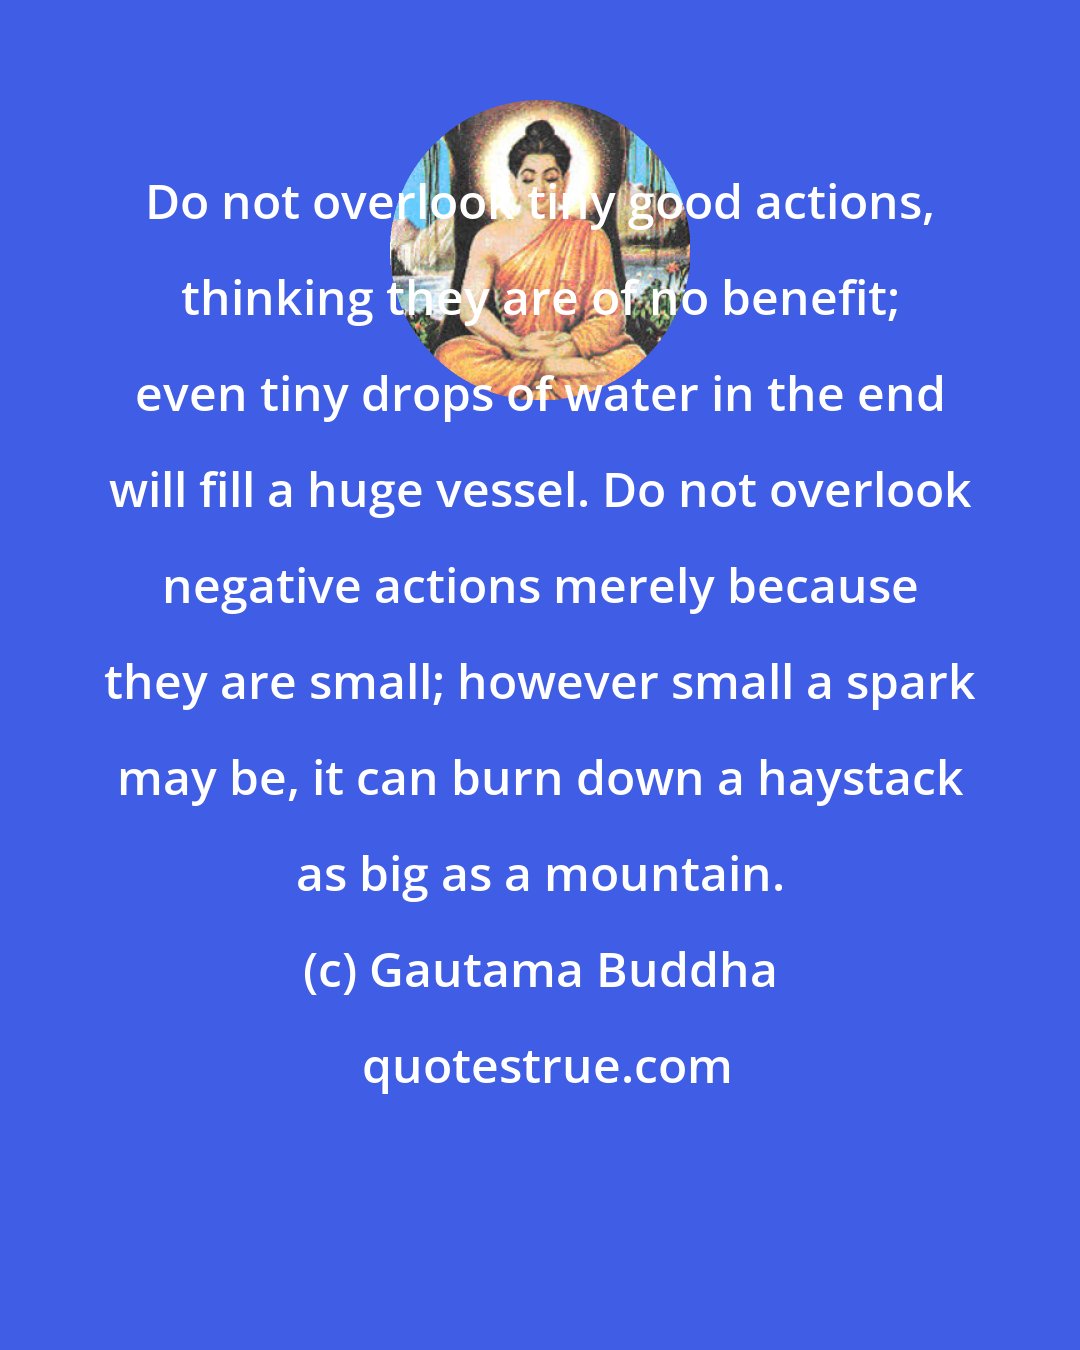 Gautama Buddha: Do not overlook tiny good actions, thinking they are of no benefit; even tiny drops of water in the end will fill a huge vessel. Do not overlook negative actions merely because they are small; however small a spark may be, it can burn down a haystack as big as a mountain.